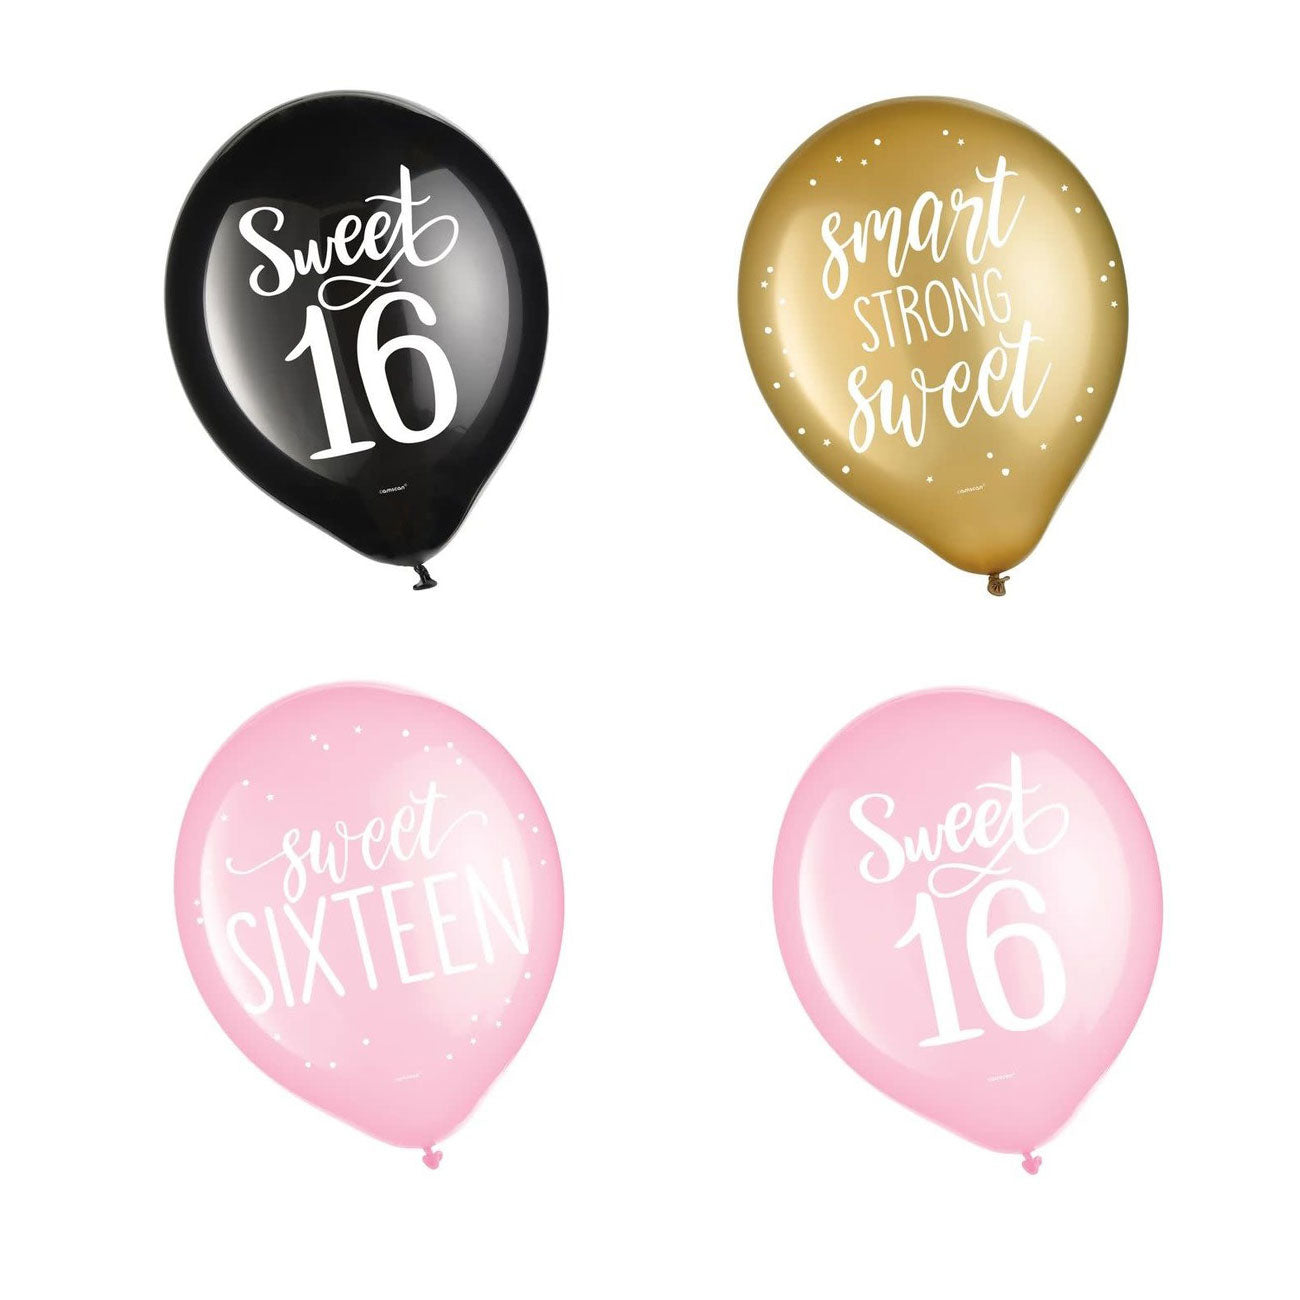 Sixteen Blush Printed Latex Balloons Assorted Colors